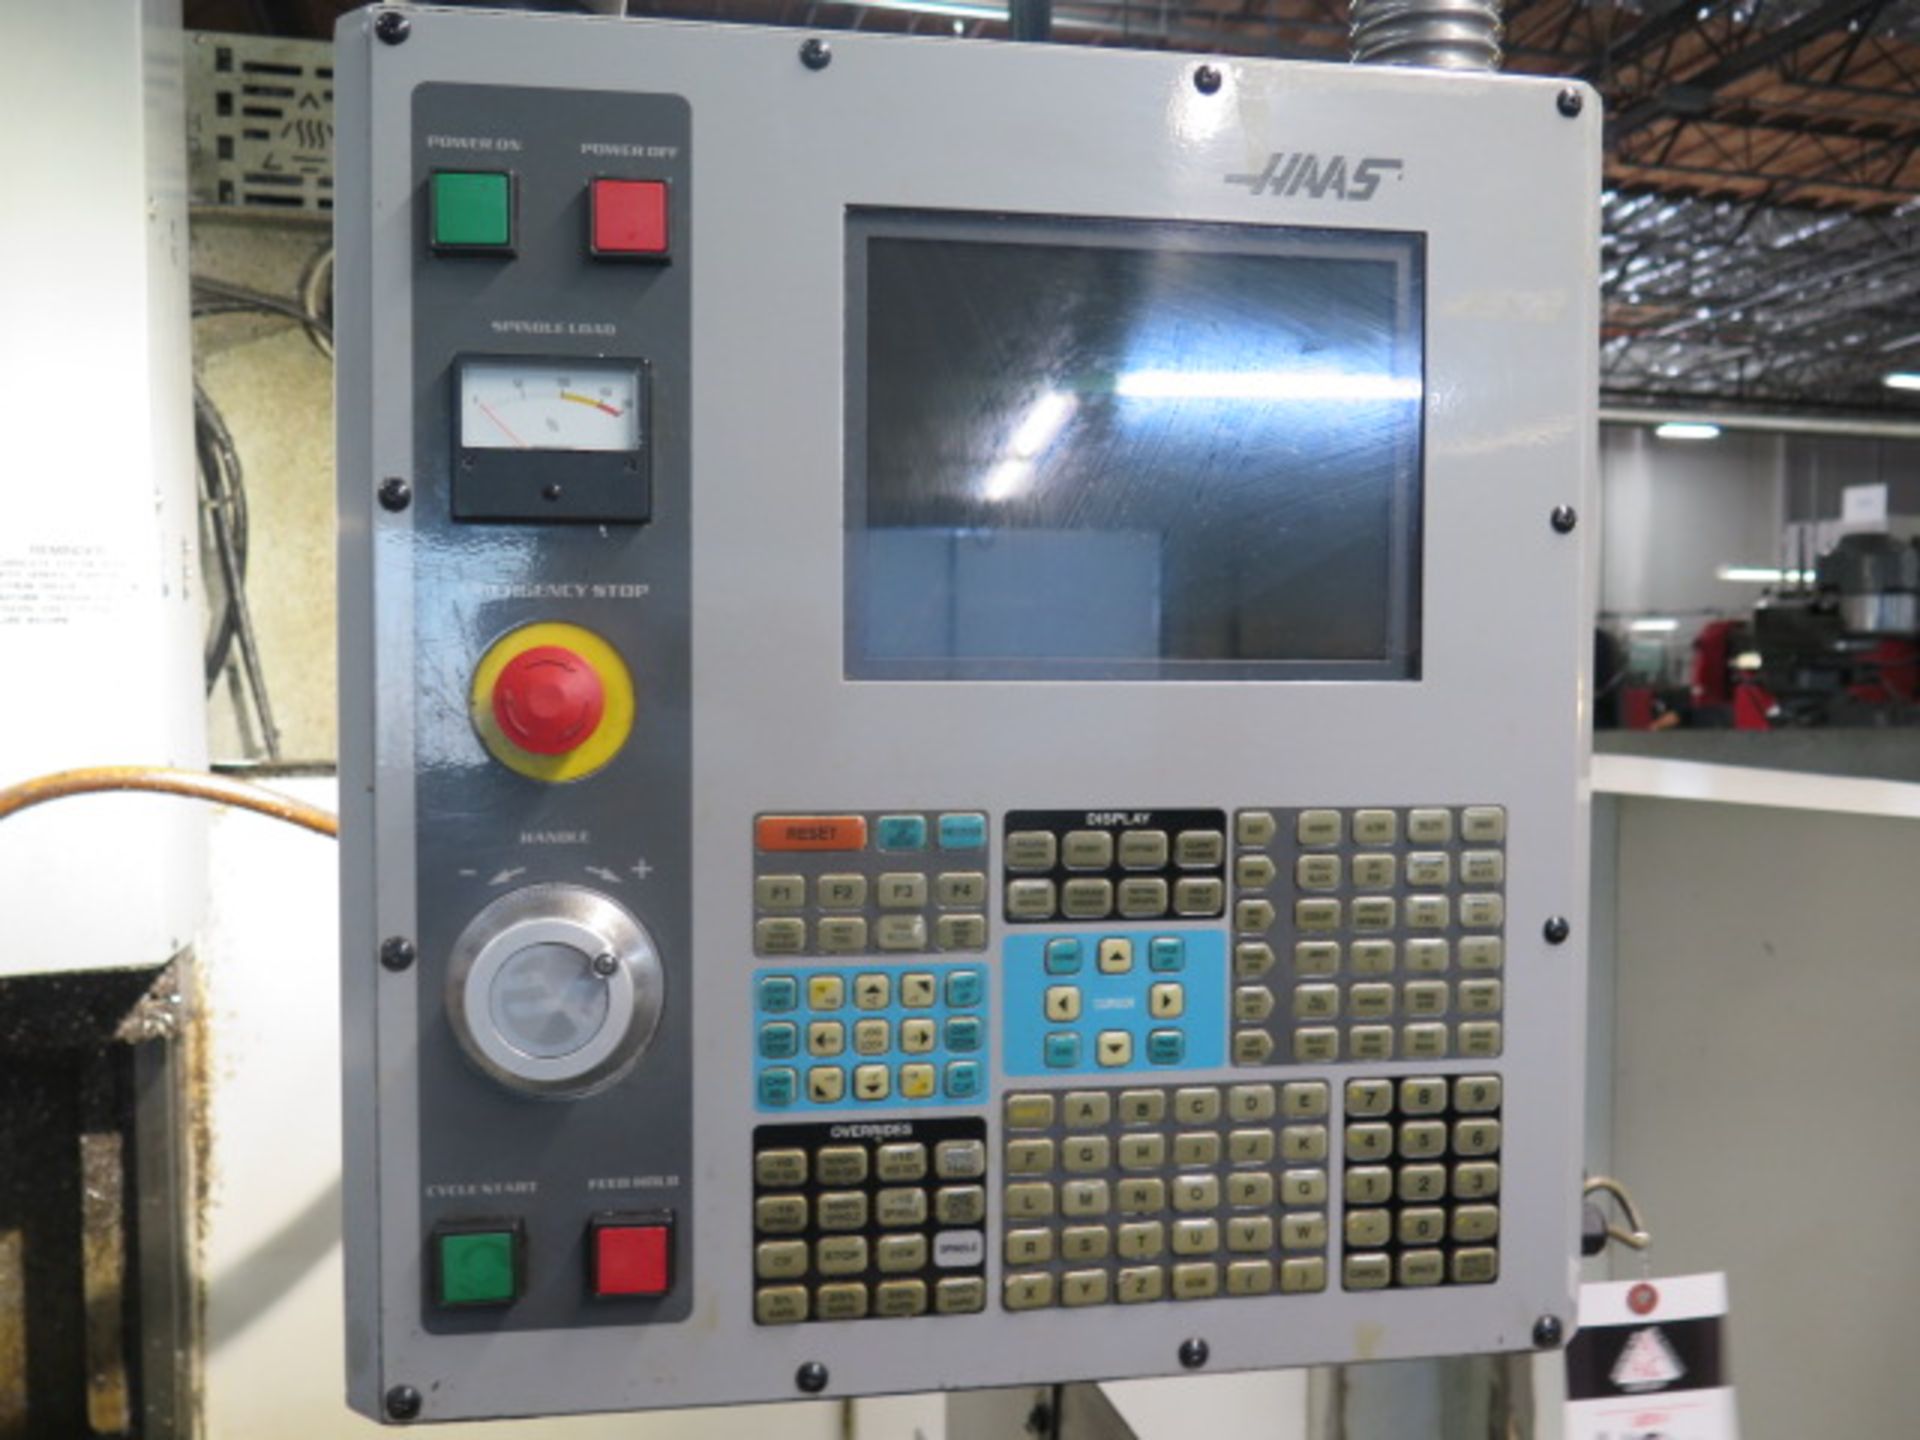 2004 Haas TM-2 “Mini Mill” CNC VMC s/n 37711 w/ Haas Controls, 10 ATC, SOLD AS IS, LIVERMORE, CA - Image 11 of 15